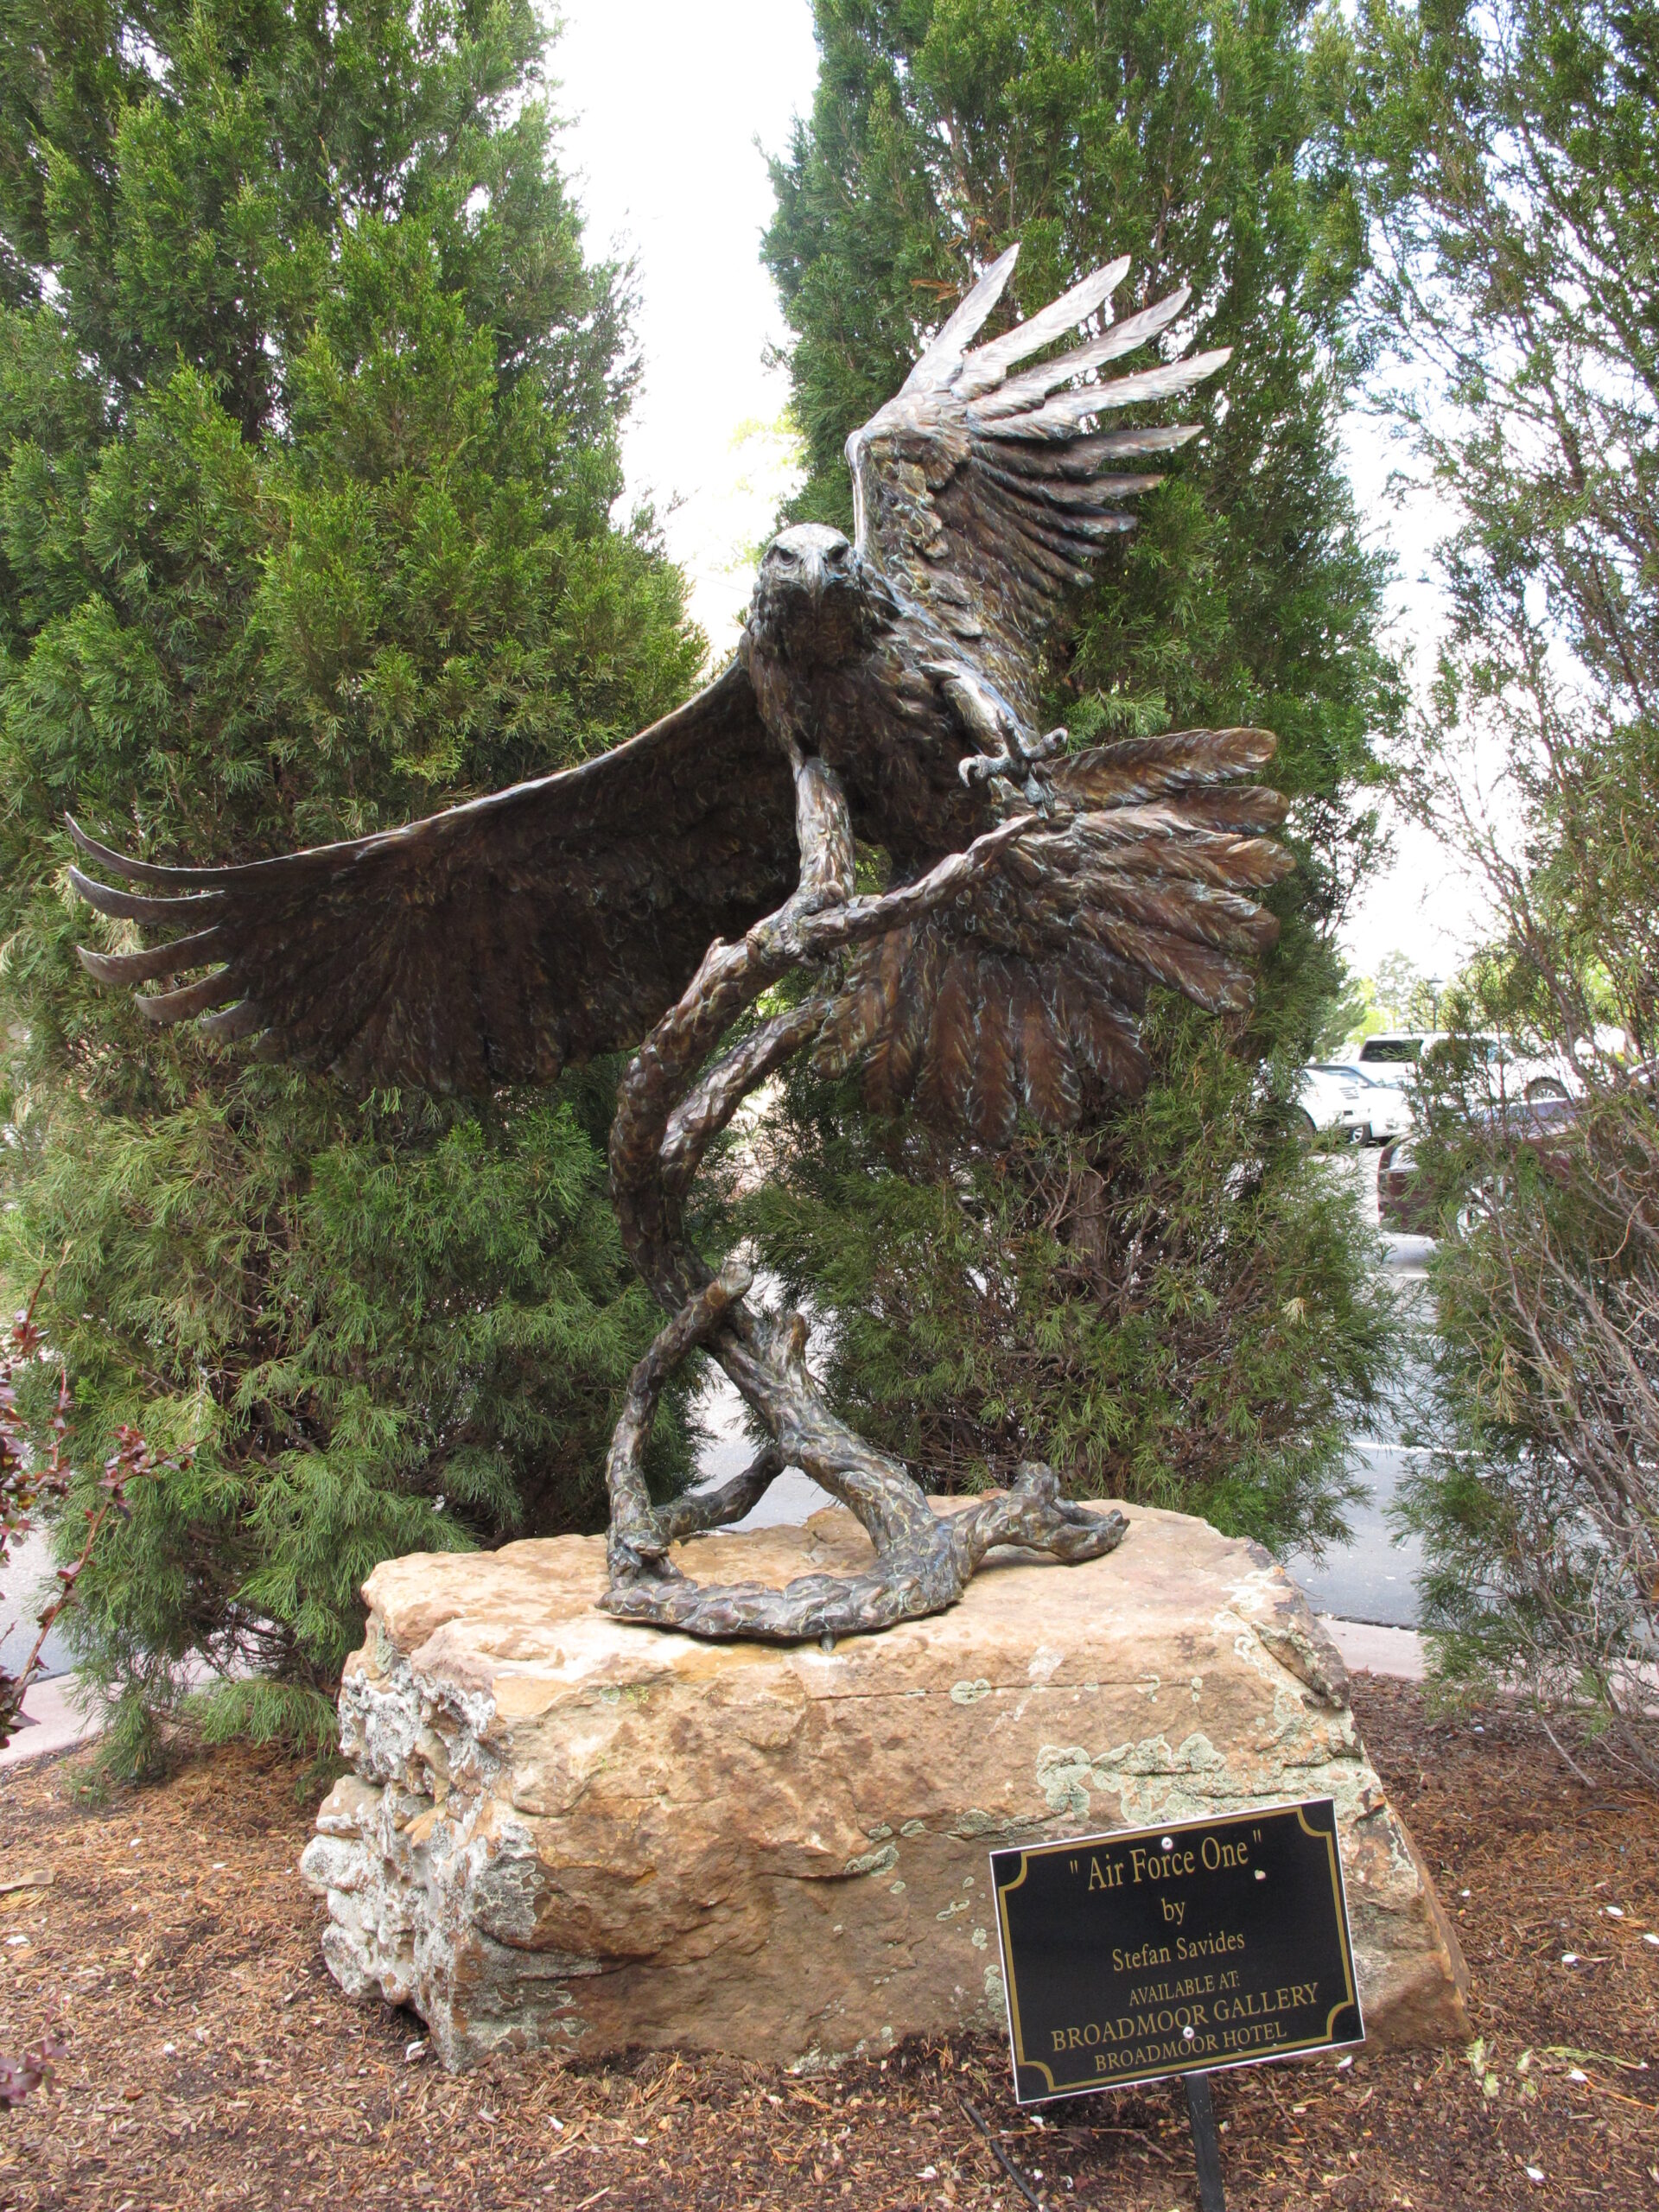 Air Force One - Bronze Eagle Statue c/o Broadmoor Galleries